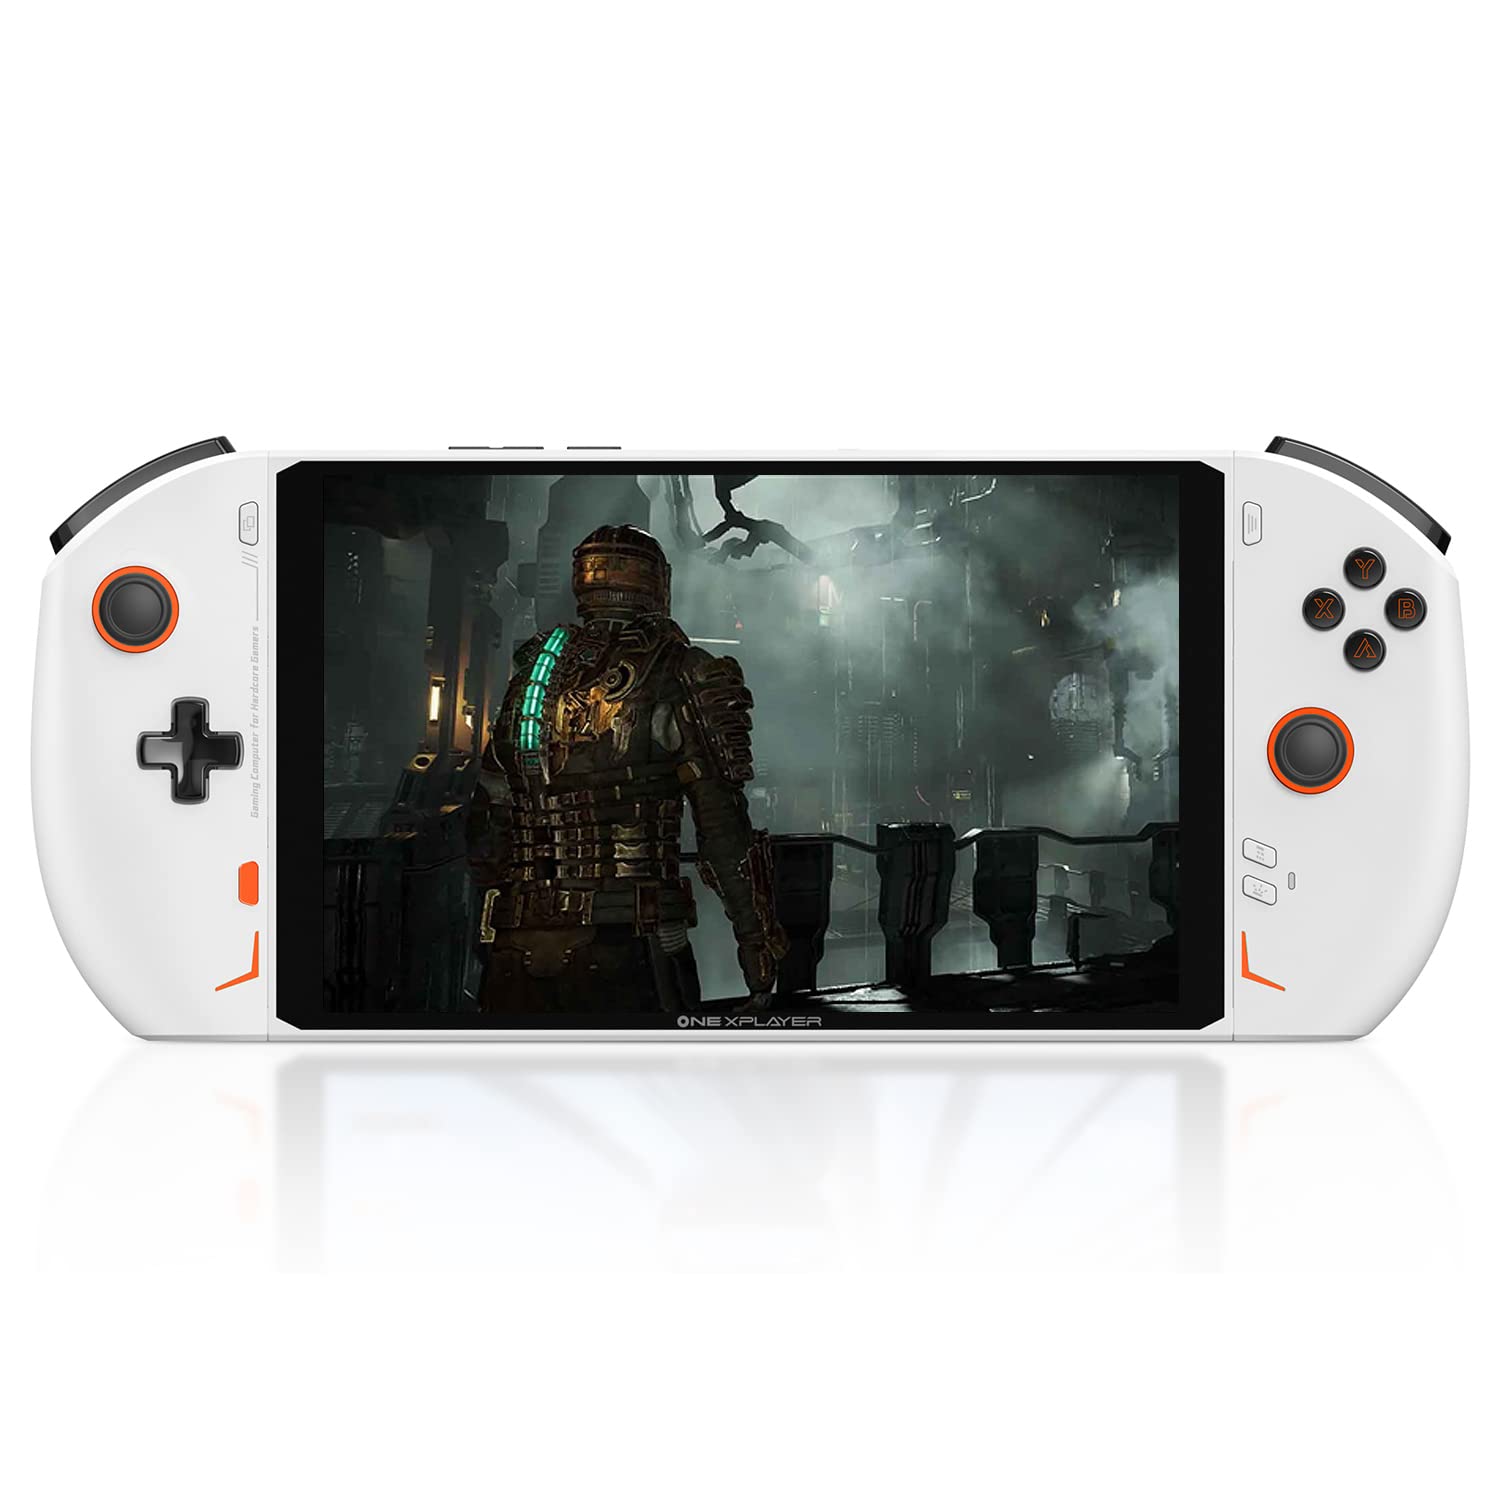 XAMMUE OneXPlayer 2 [AMD Ryzen 7 6800U] 8.4 Inches 5 in 1 Handheld PC Video Game Console One X Player 2 Portable Win 11 Home OS Laptop 2560x1600 Mini Pocket Tablet PC (White, AMD R7 6800U-32GB+1TB)